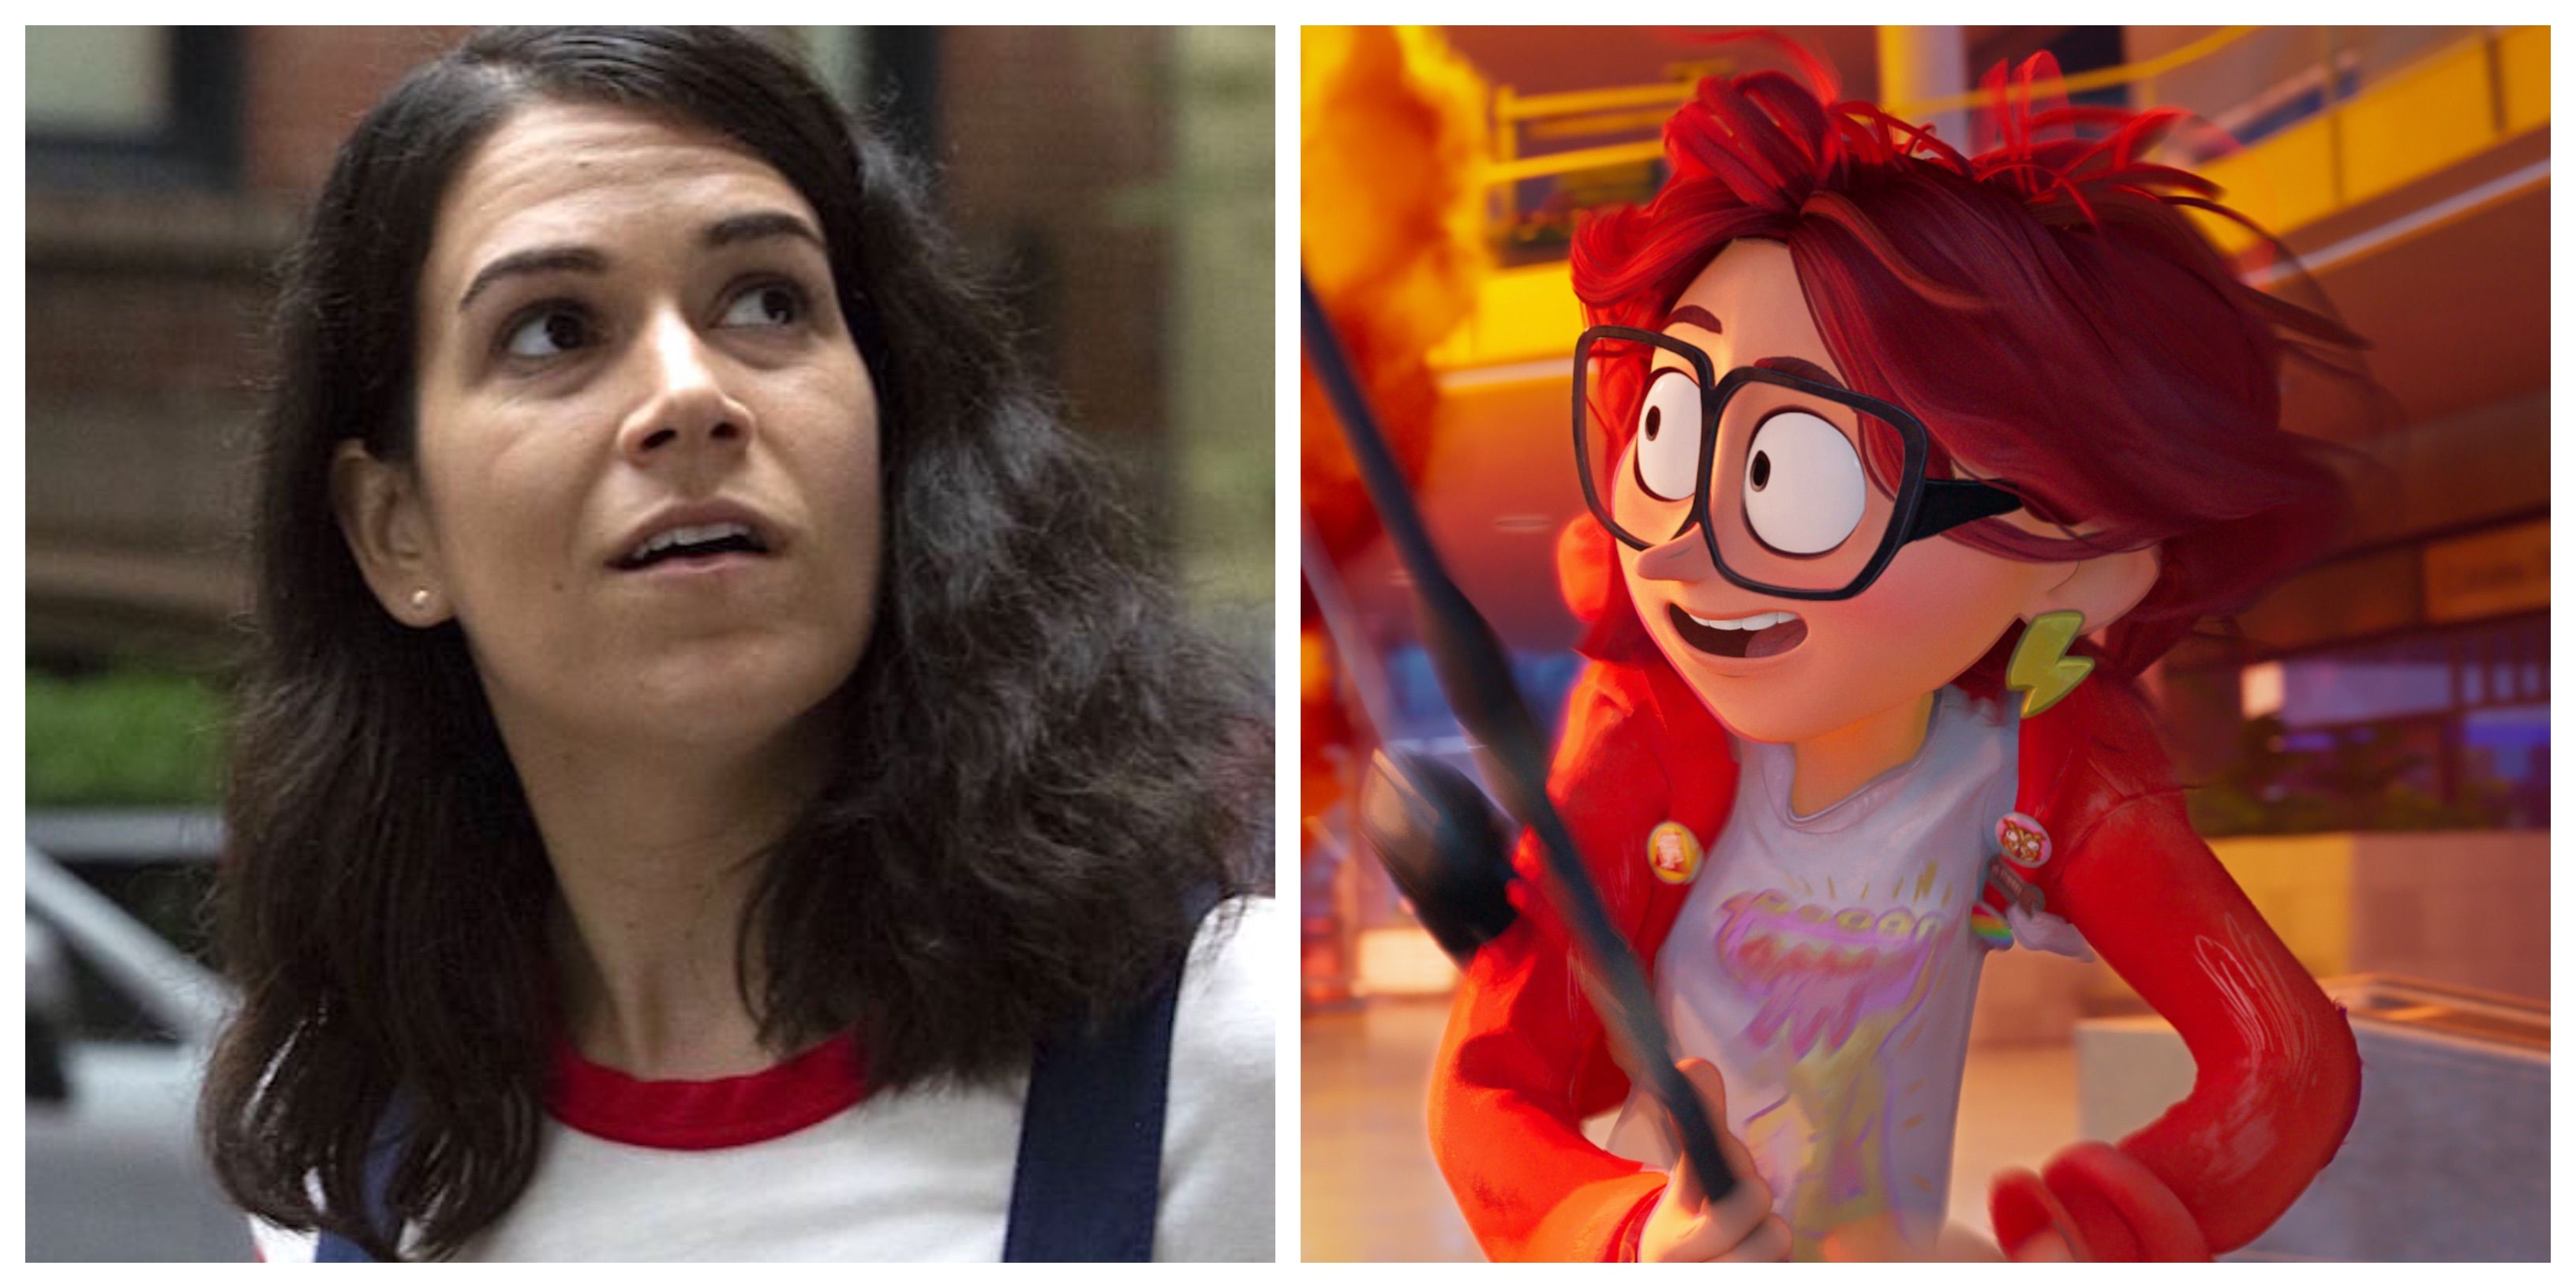 Abbi Jacobson as Katie Mitchell in The Mitchells vs. the Machines on Netflix